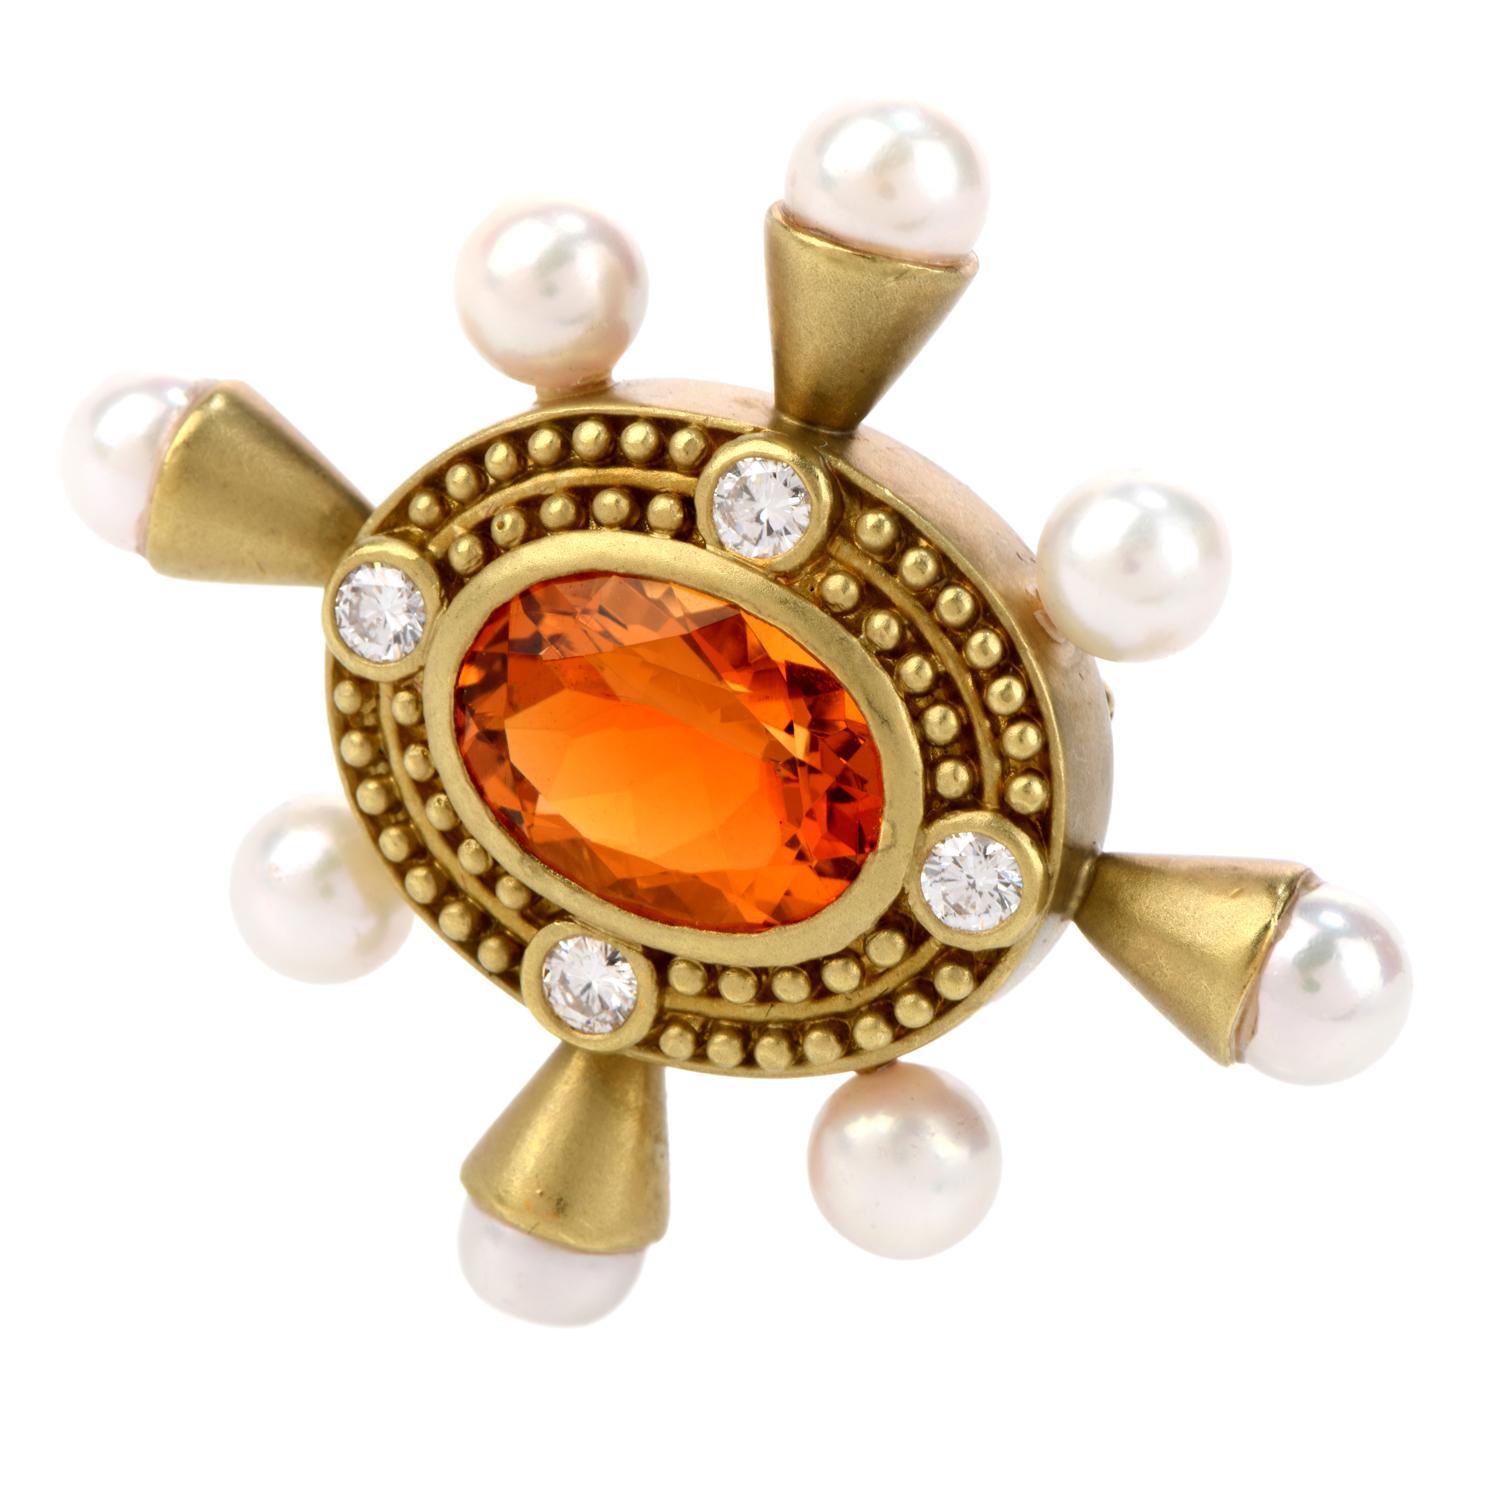  Burst into the room with vibrance with this Estate Diamond Citrine & Pearl 18K Gold Oval Pin Brooch.
 Crafted in 18K gold and weighing 21.5 grams, this wonderful pin brooch measures at 42 by 48 millimeters. 
There is one oval, bezel set, genuine